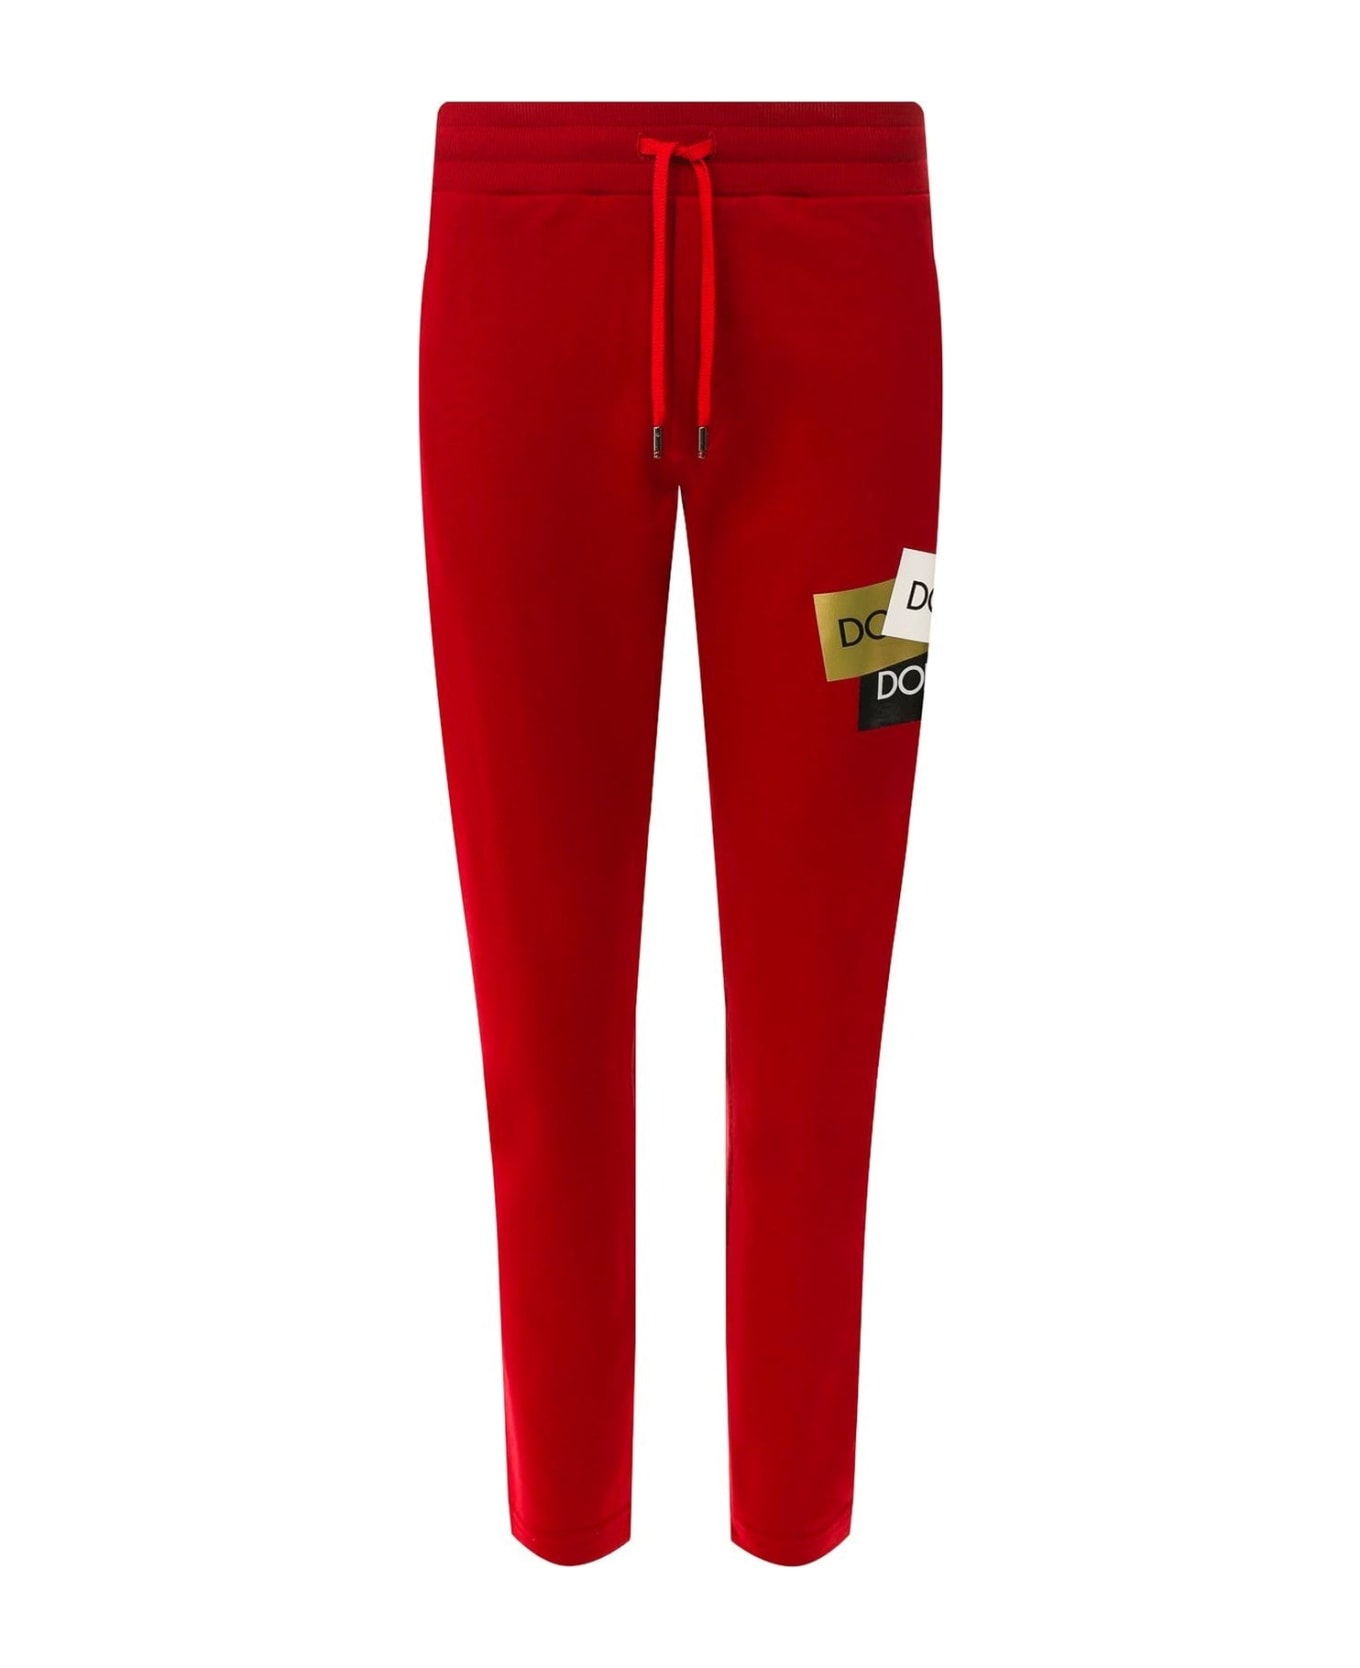 Dolce & Gabbana Jogging Style Pants - Red